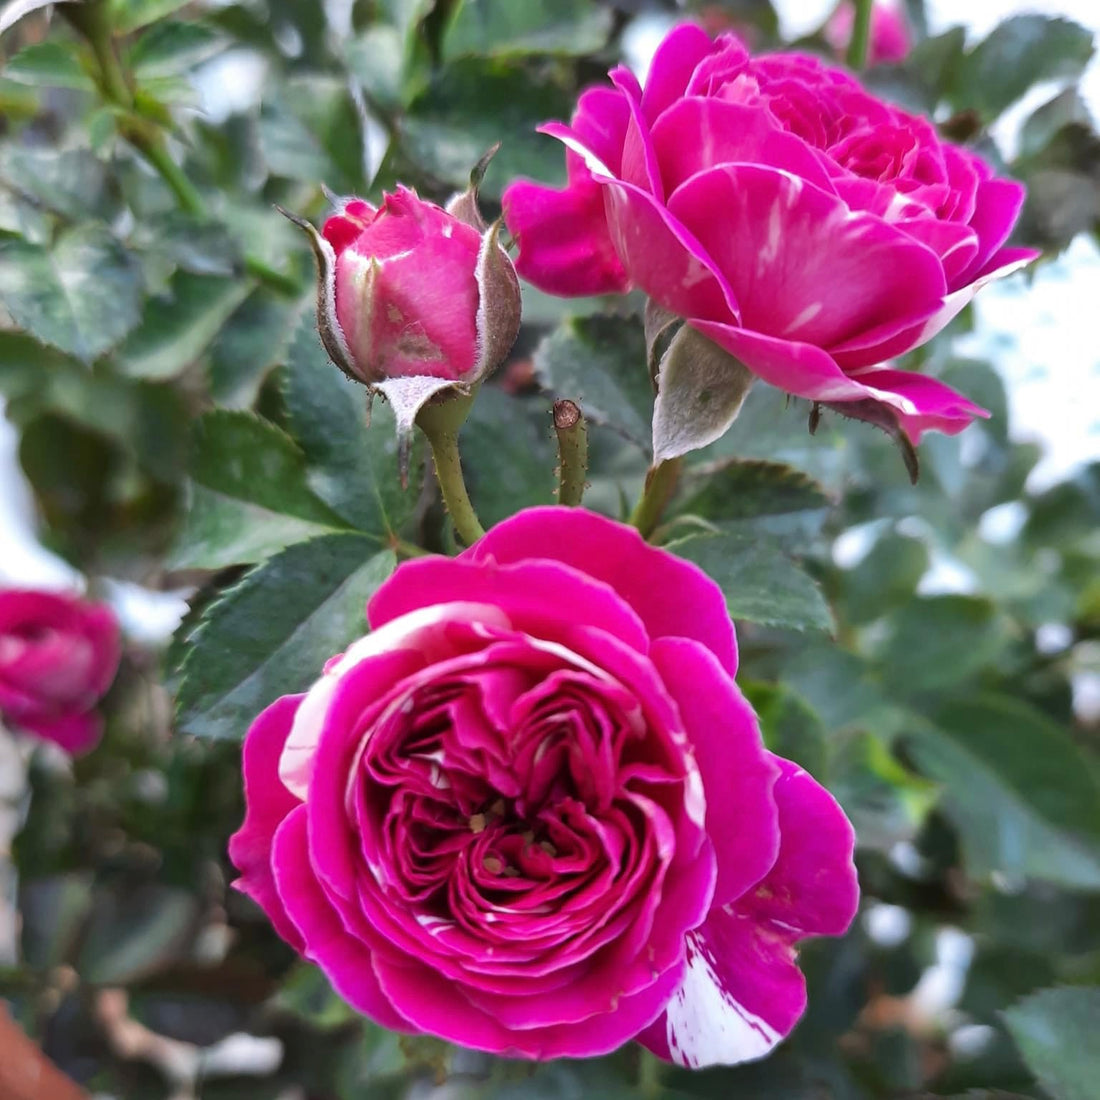 SCENTED JEWEL ROSE: A Must-Have for Rose Enthusiasts